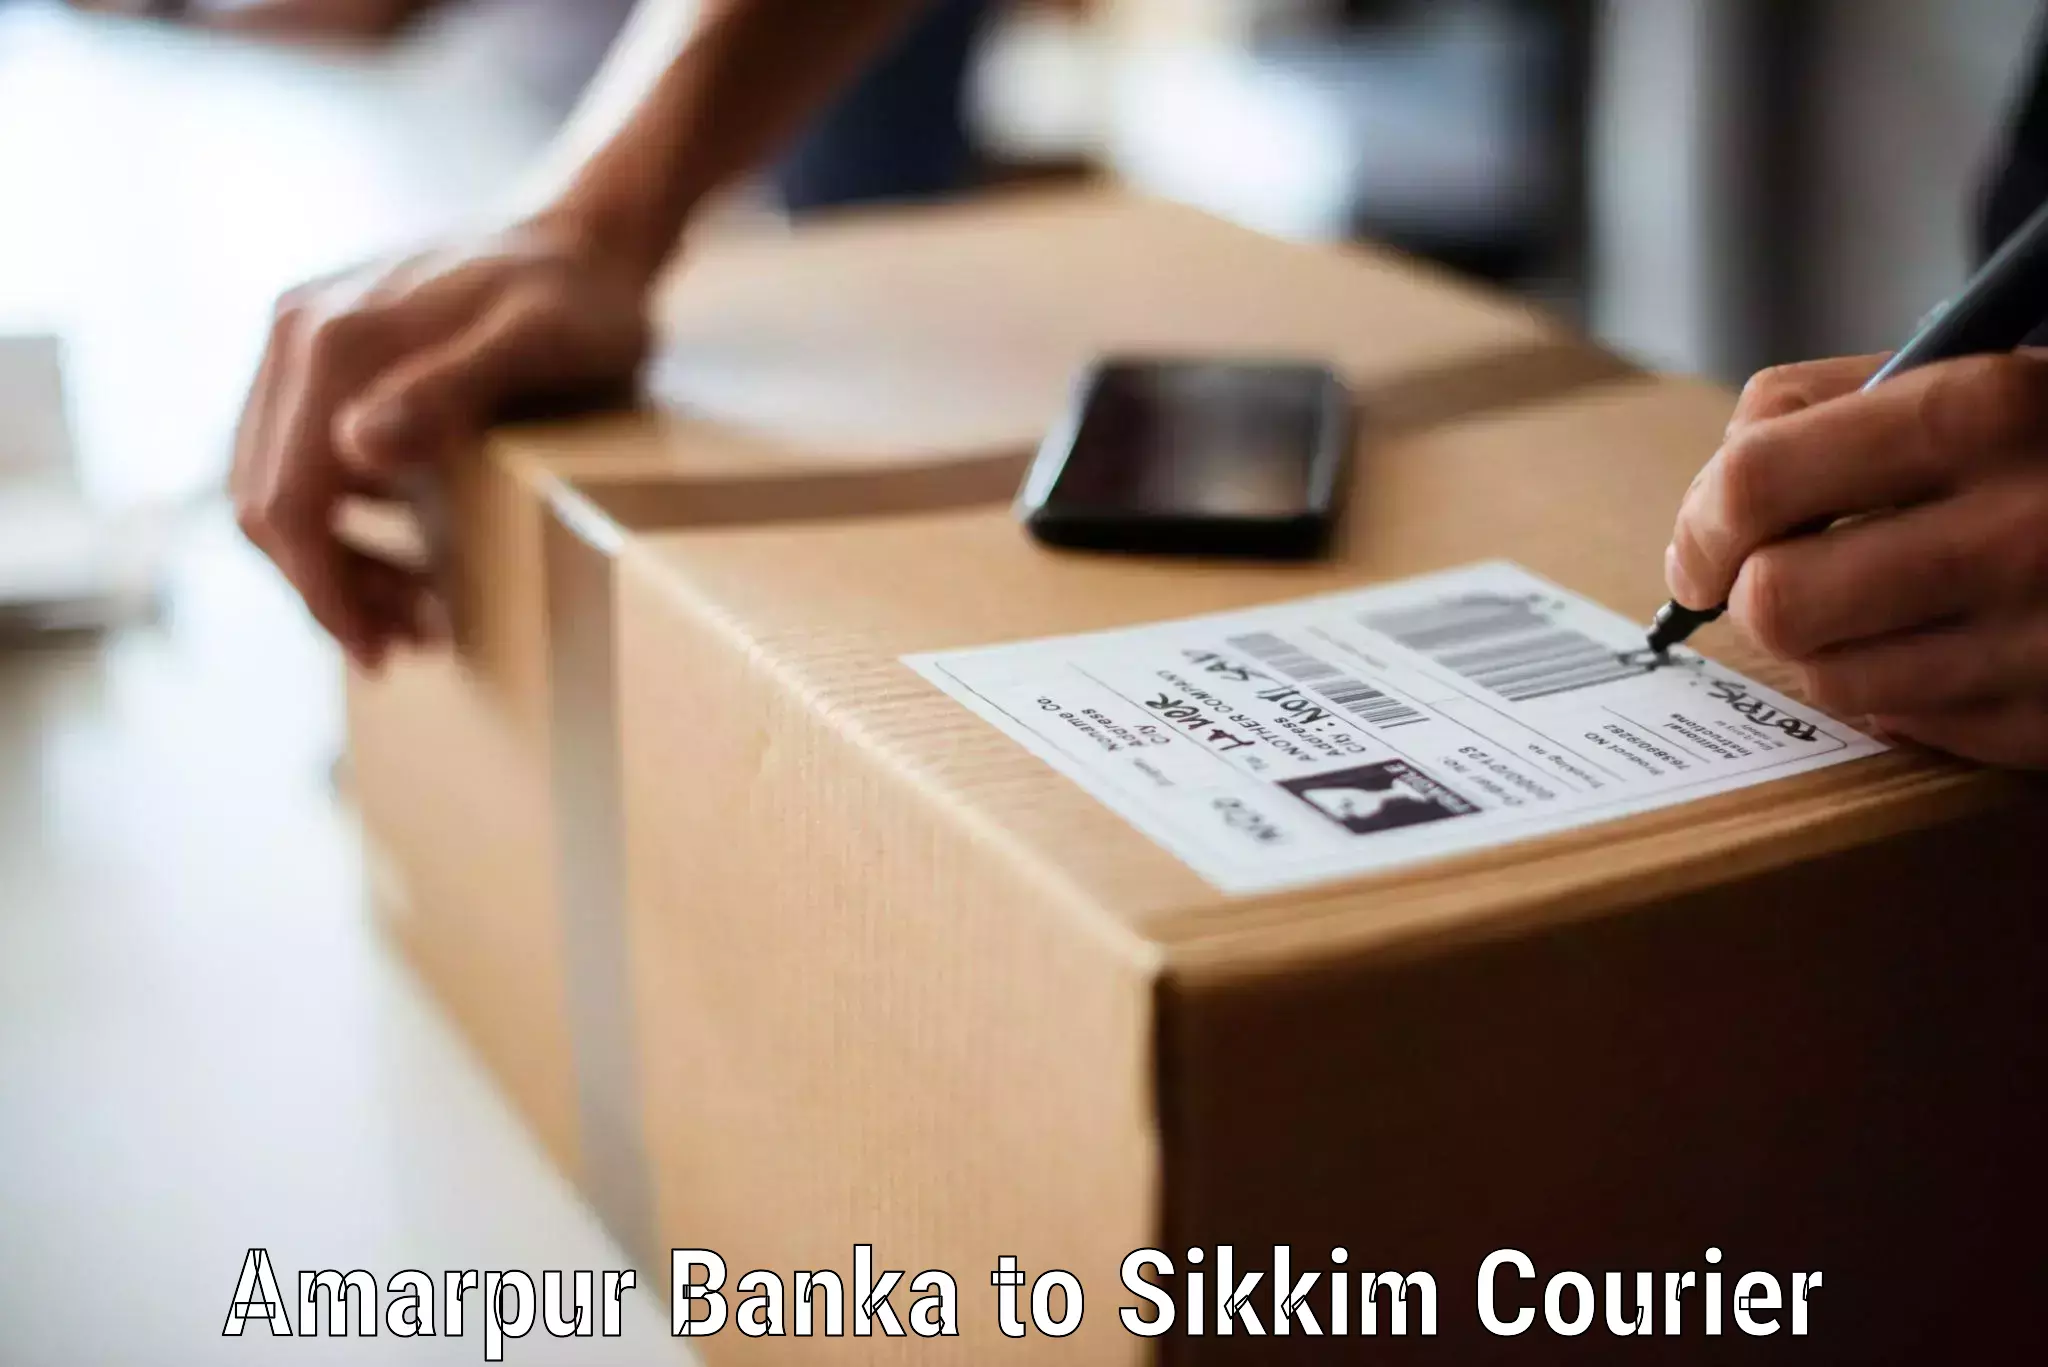 Professional movers and packers Amarpur Banka to Sikkim